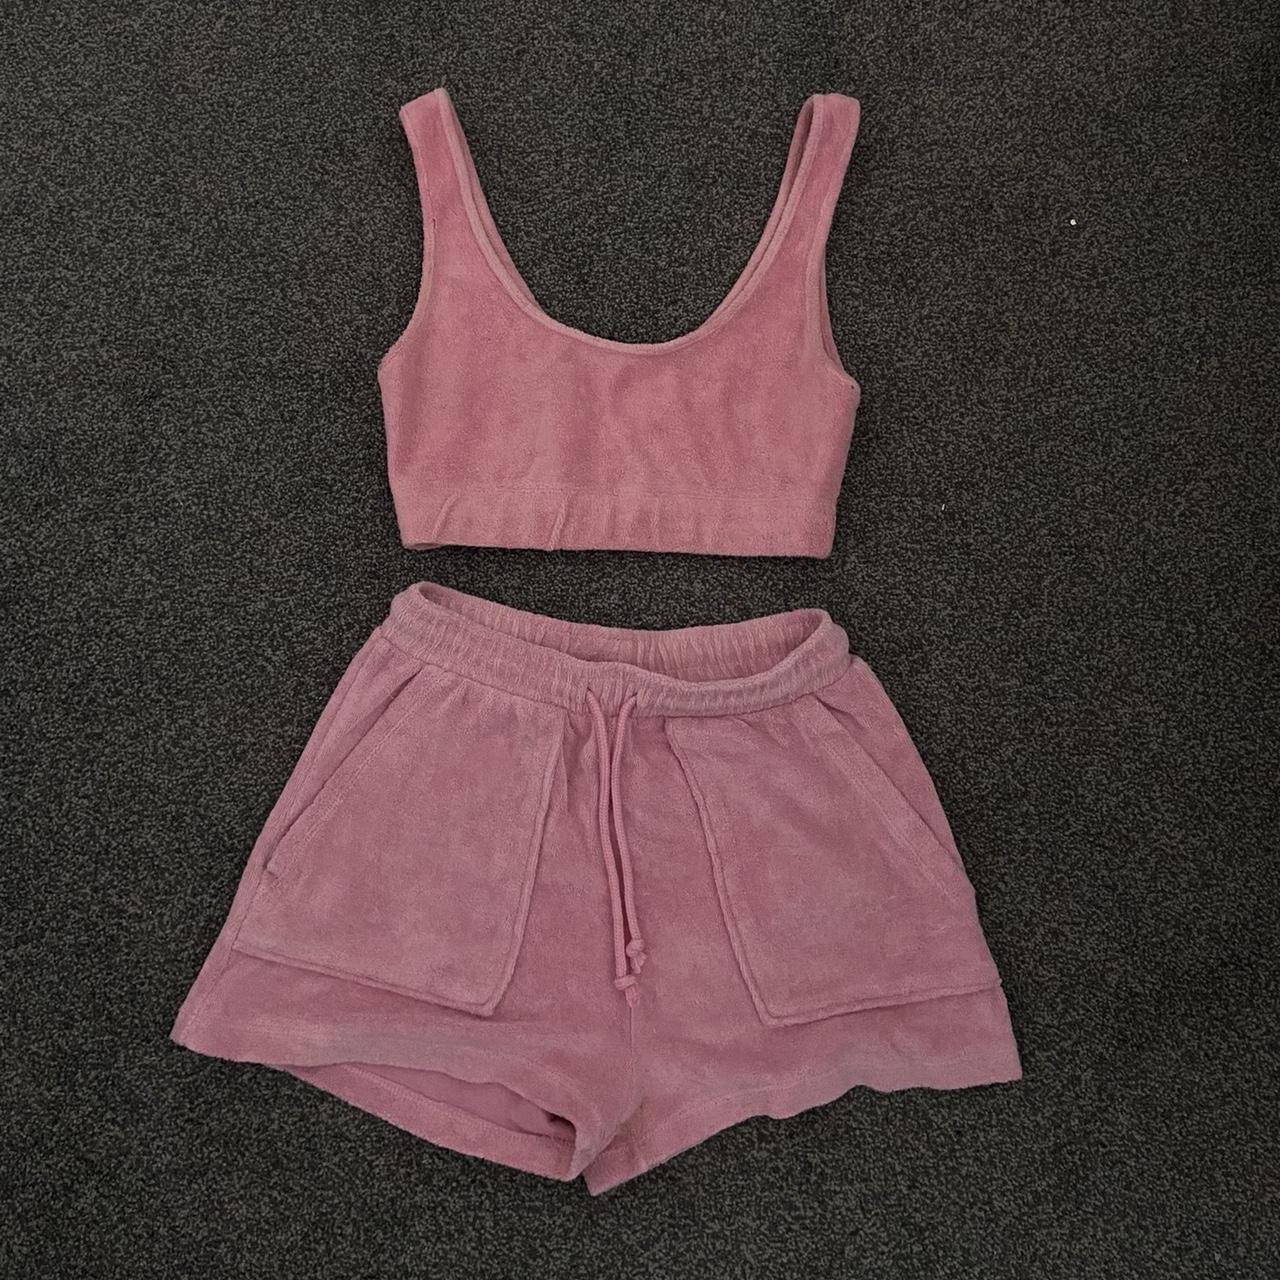 Zara Pink shorts two piece Towelling material,... - Depop